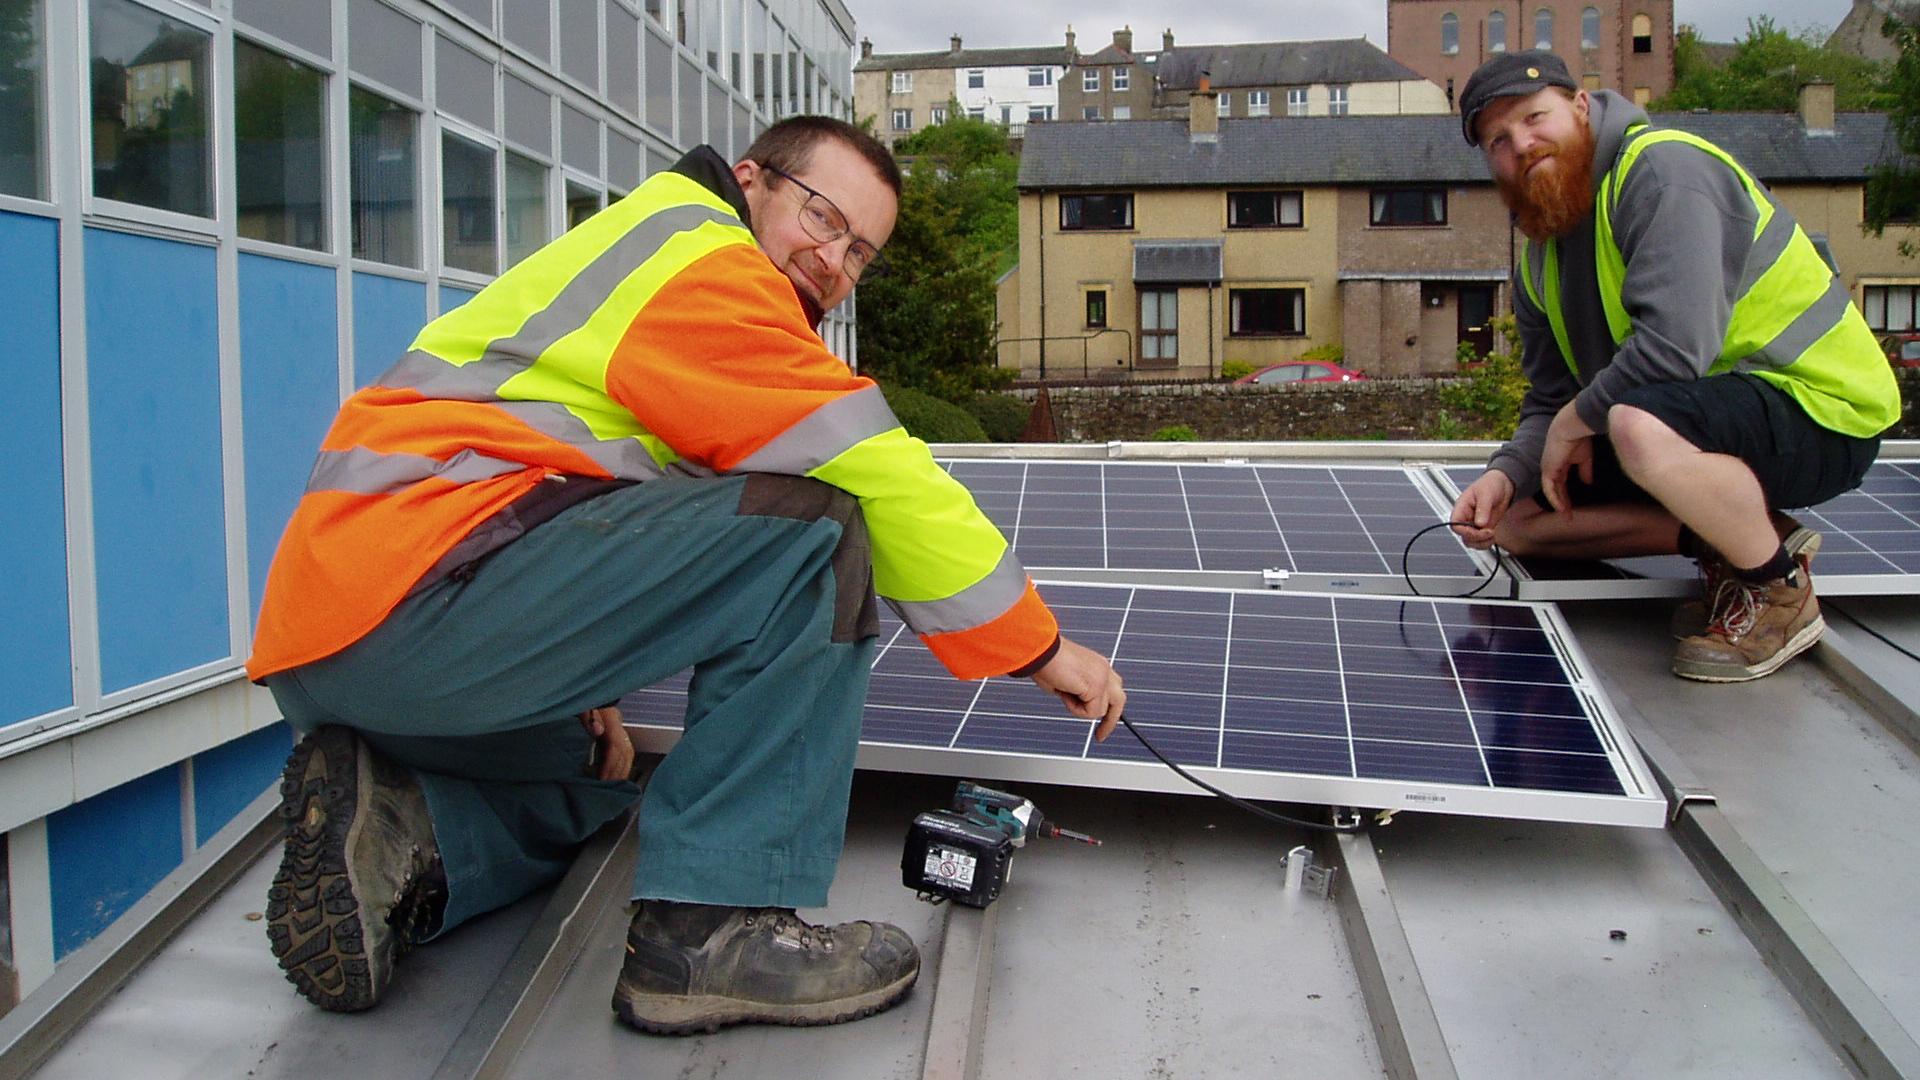 Keith Hodgson and Keir Marsden from Love Solar Ltd installing the solar PV panels on the roof of Alston schools